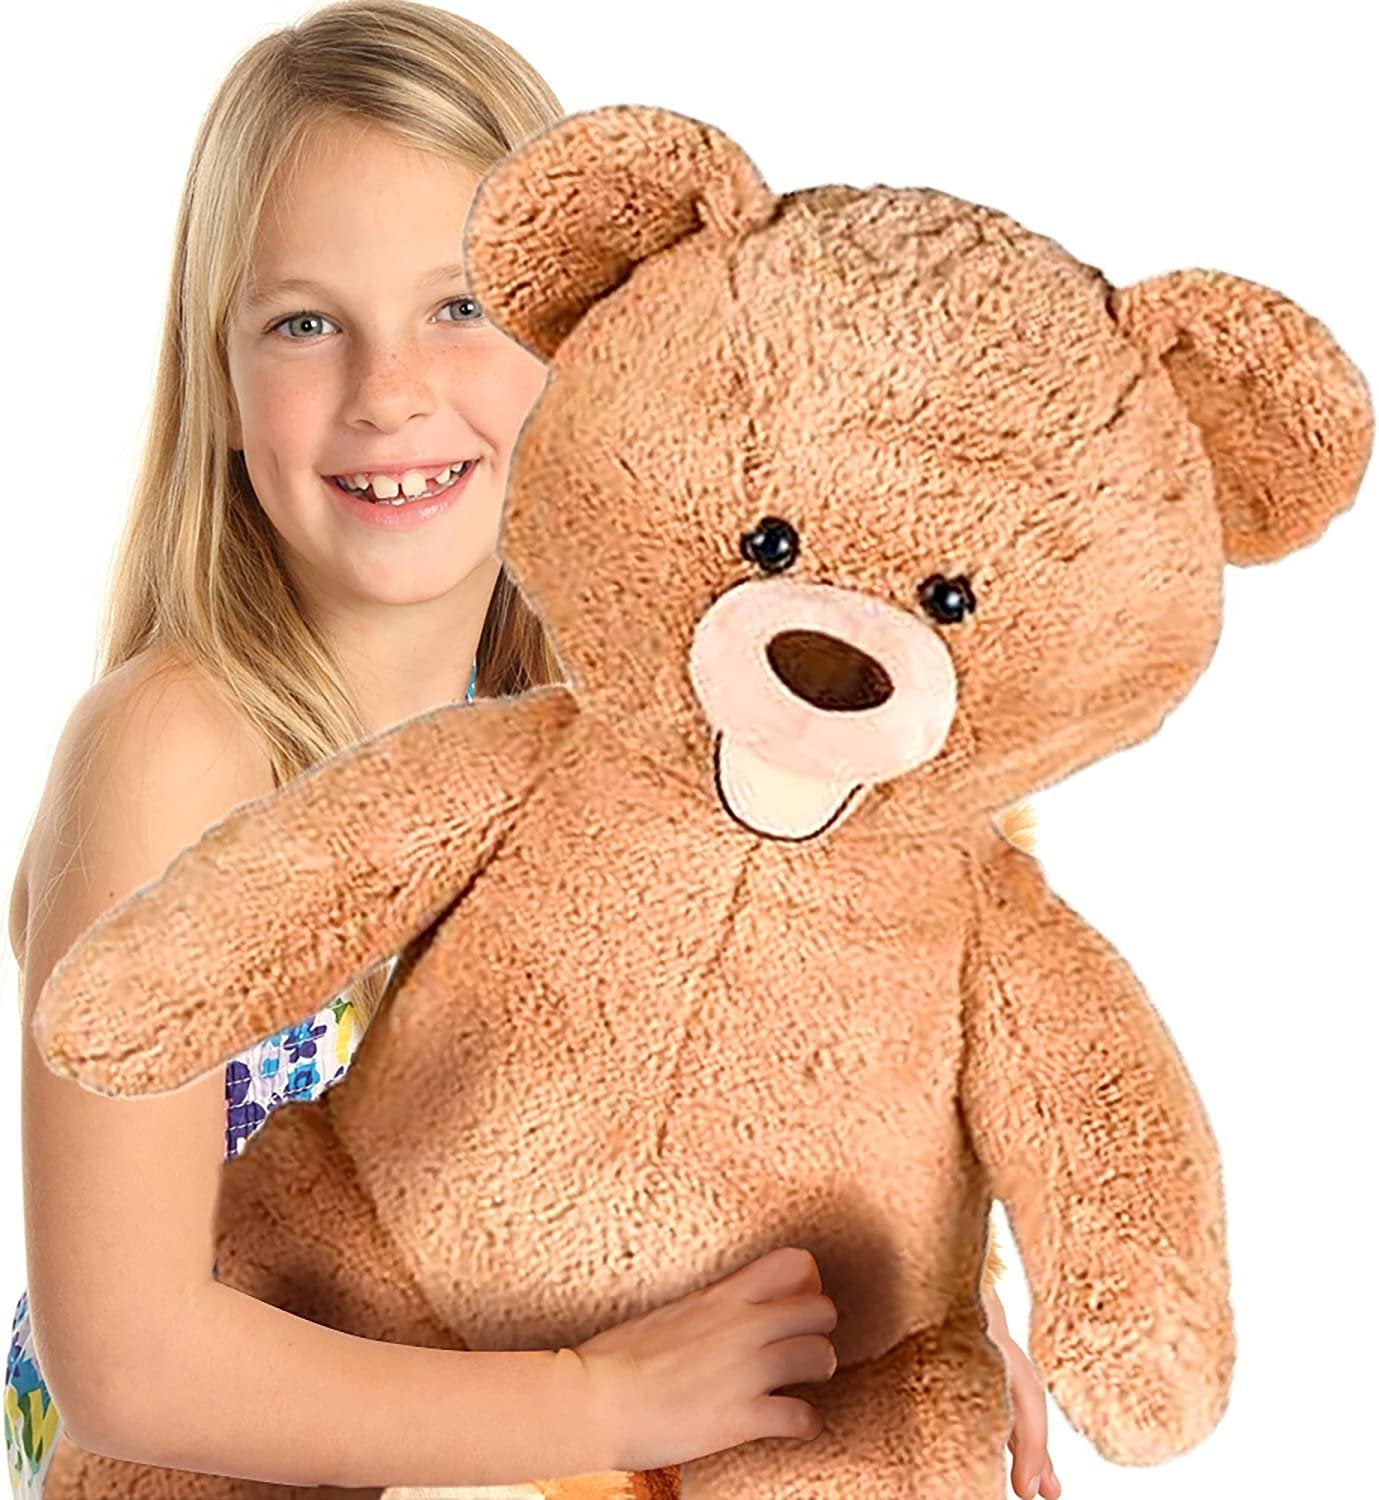 ArtCreativity 4 Feet Giant Teddy Bear - Extra Plush and Soft Toy - Jumbo Large Stuffed Animal for Kids and Adults - Huge Plush Bear - Great Gift Idea for Boys and Girls - Gigantic Carnival Prize